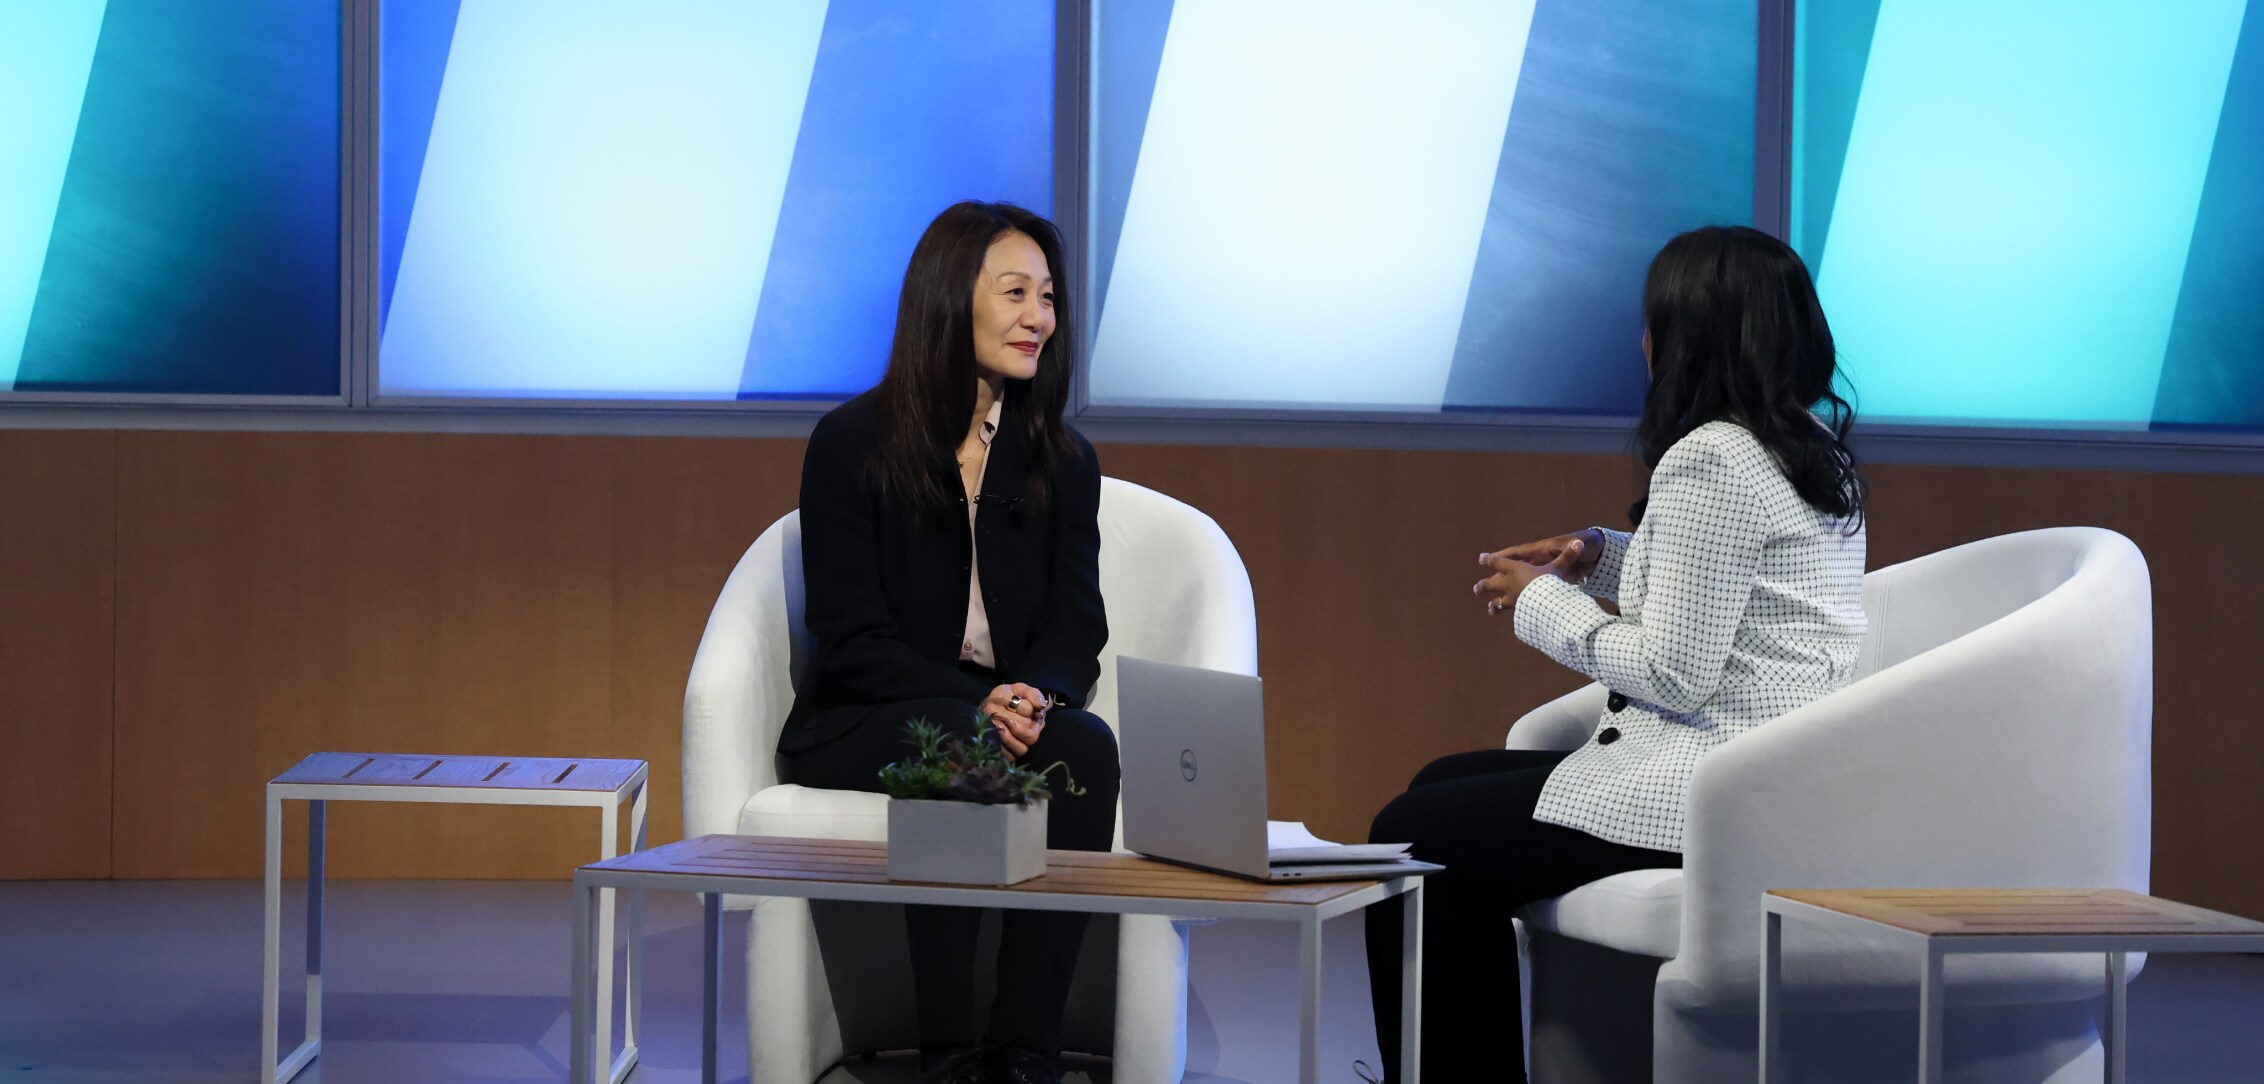 A professional interview setup at Dell Technologies World 2024 featuring two women conversing, with a modern and brightly lit background.